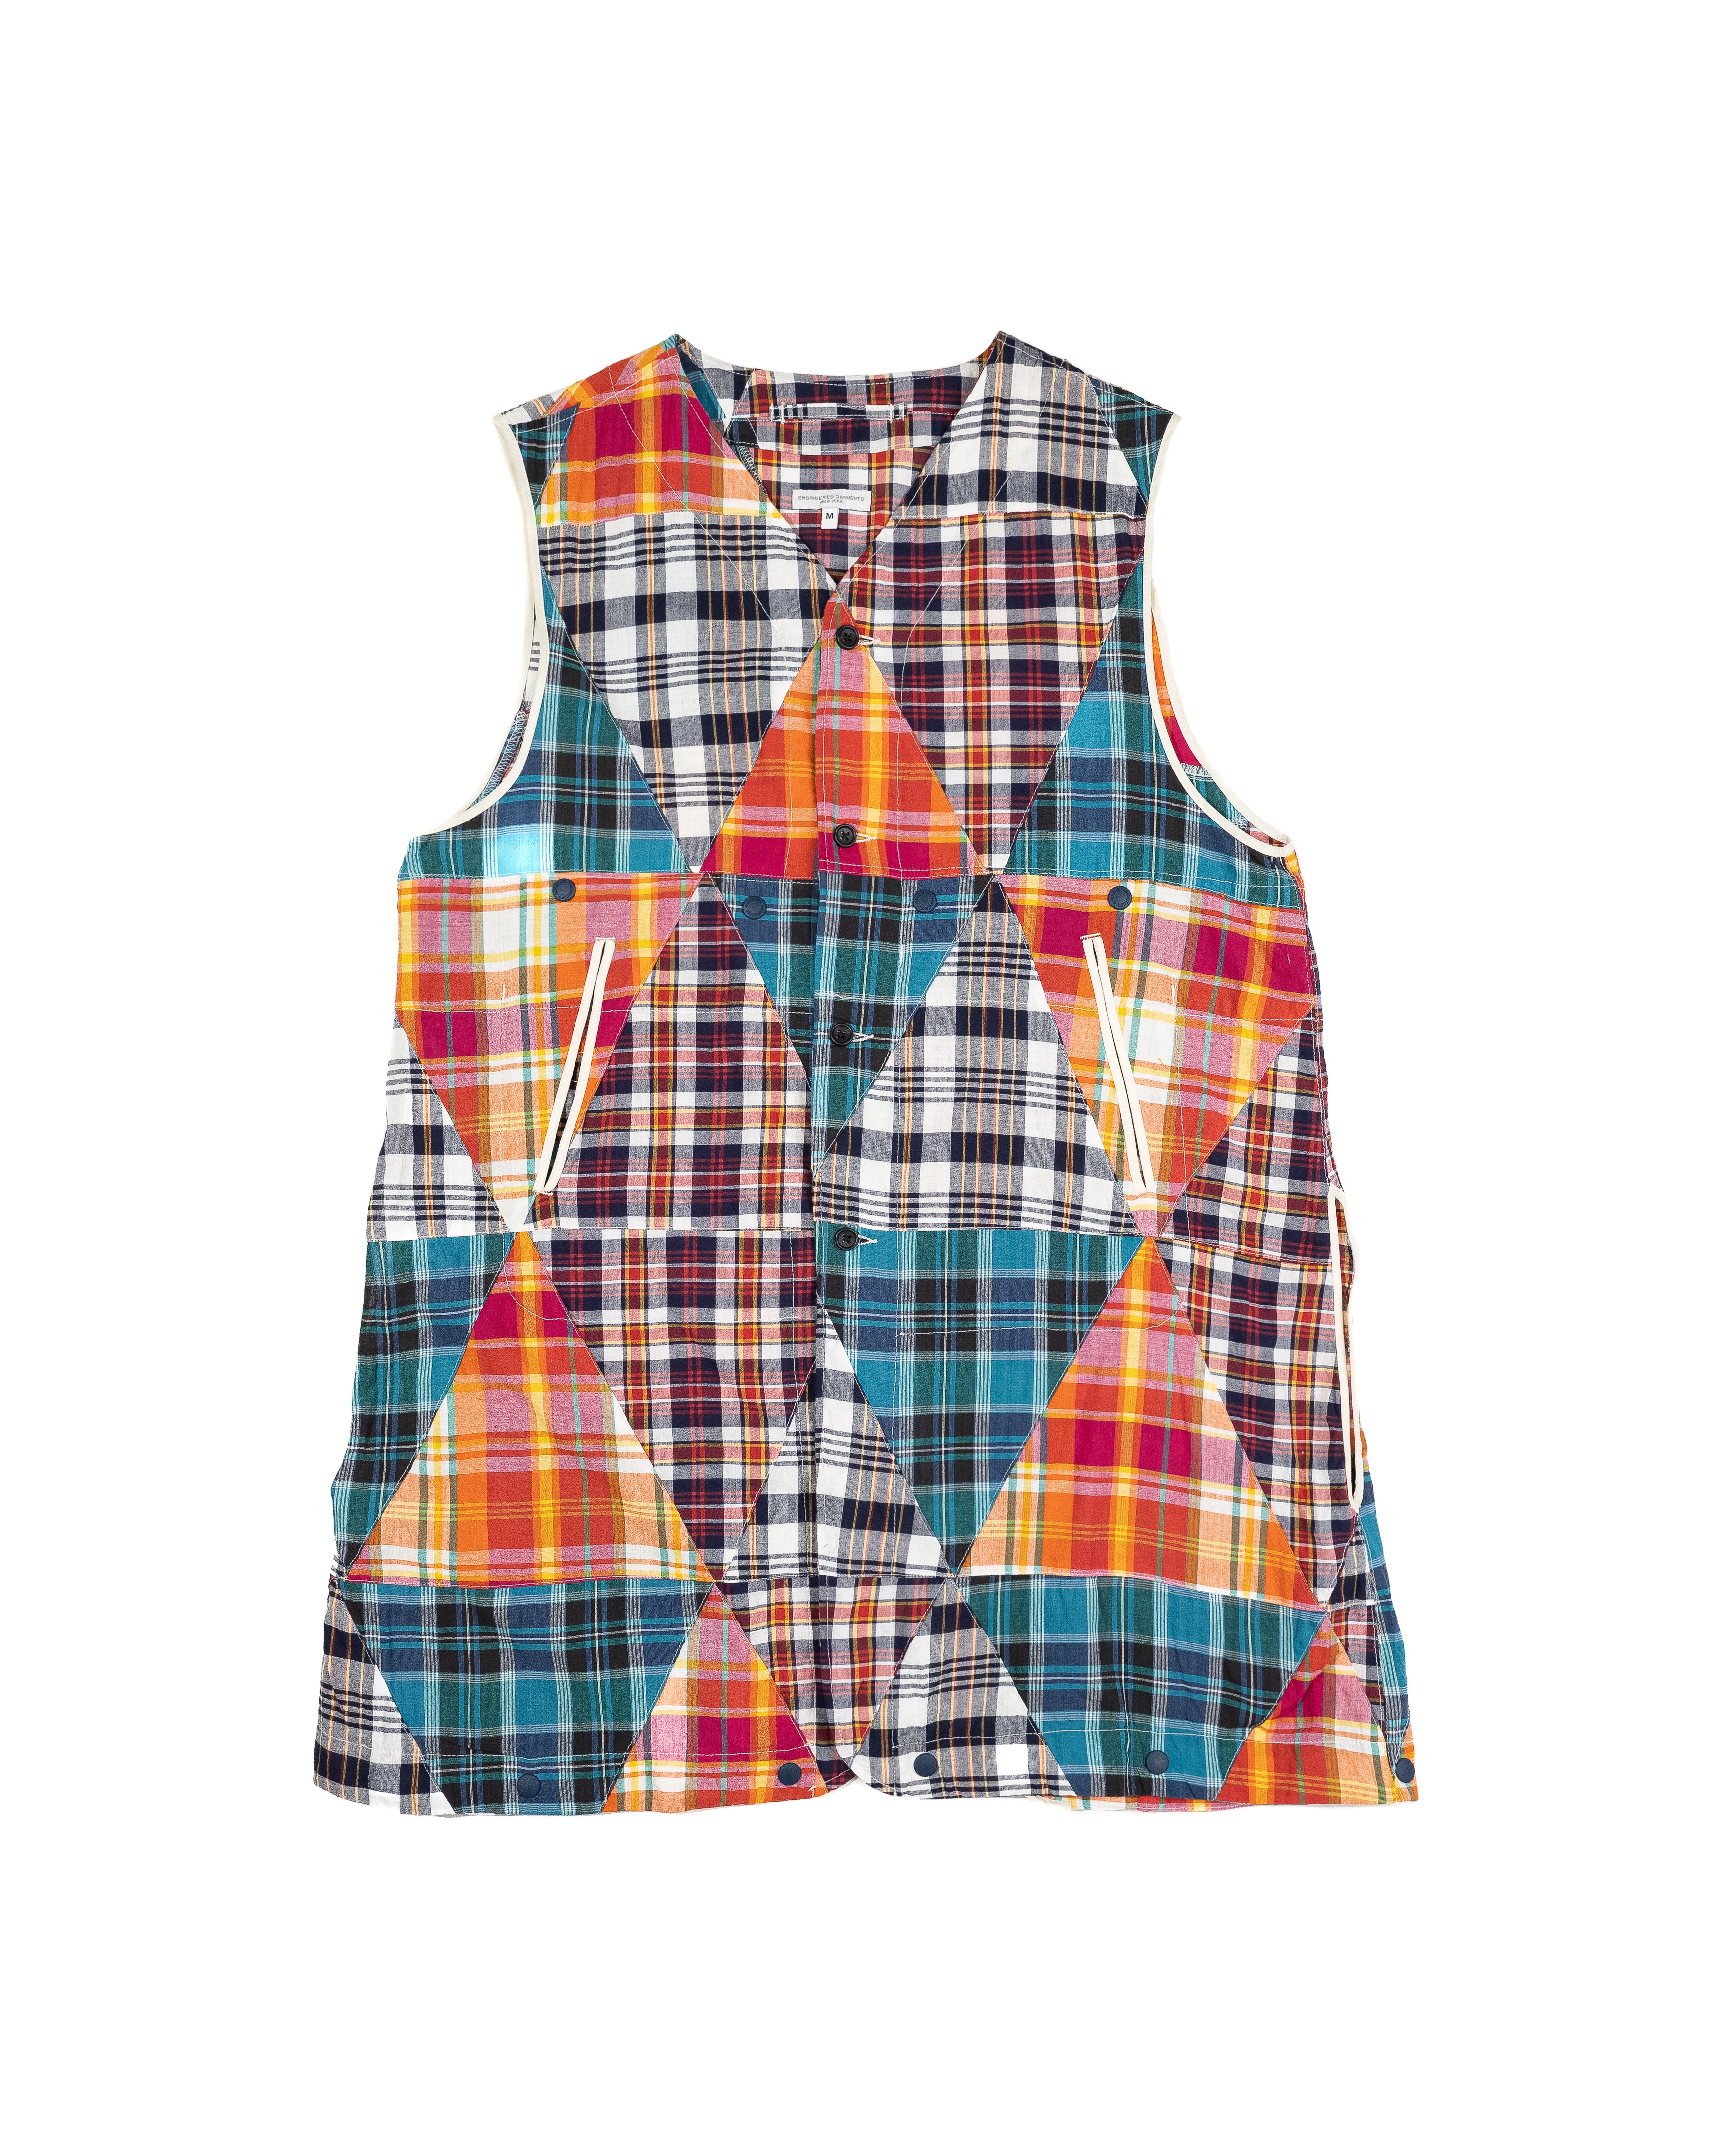 Vests | Nepenthes New York